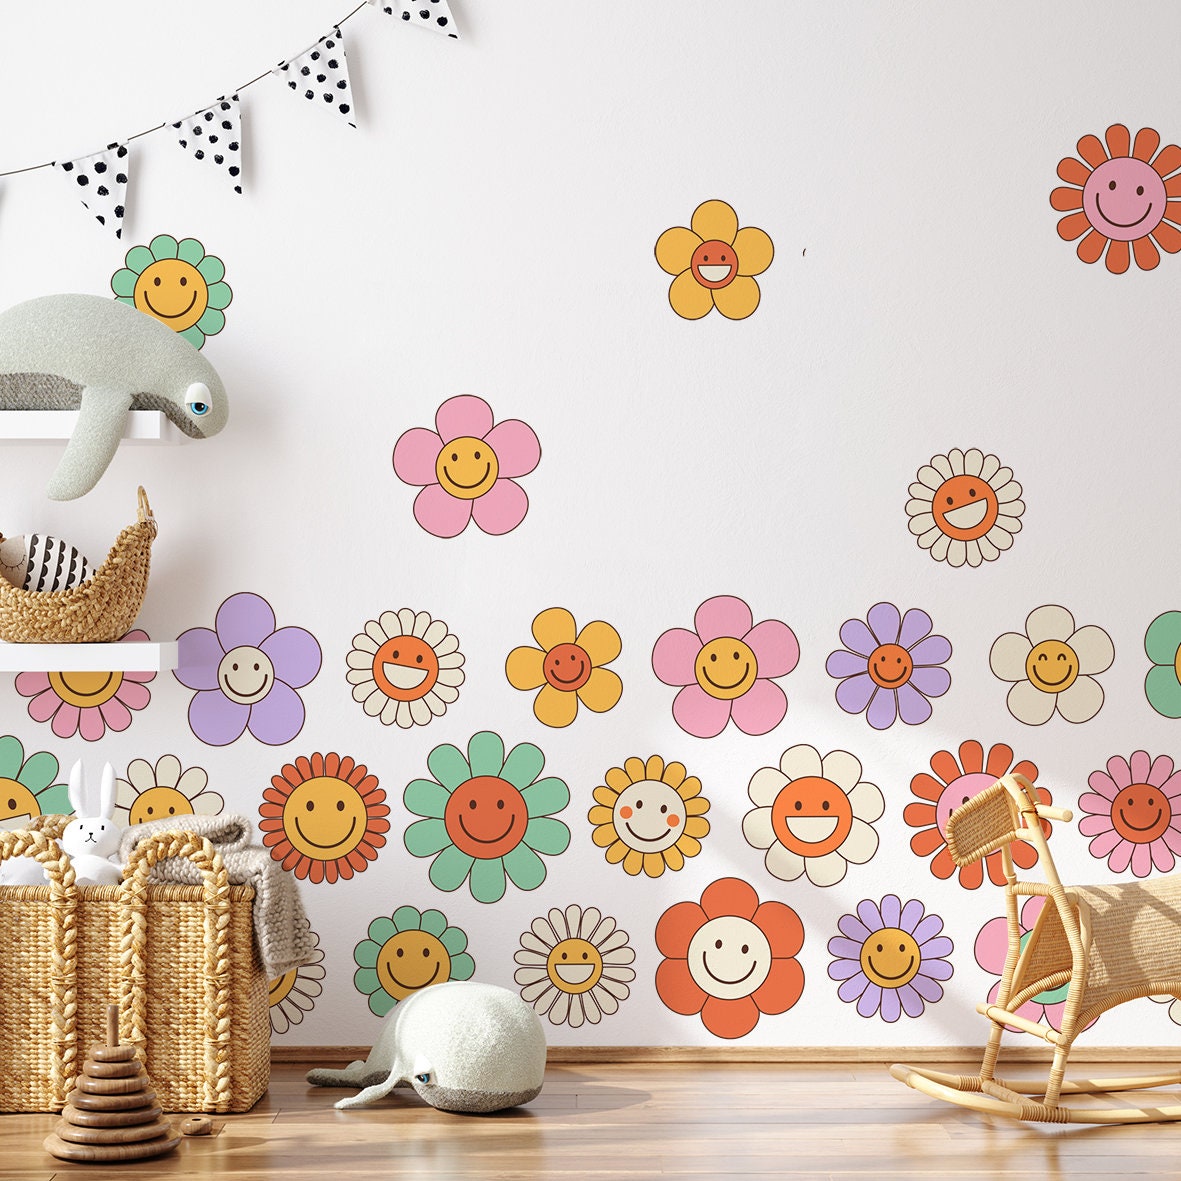 Floral Wall Stickers, Floral Wall Decal, Pink Flower Wall Decal, Smiley  Flowers Wall Sticker, Pastel Flower Wall Stickers, Colorful Srickers 